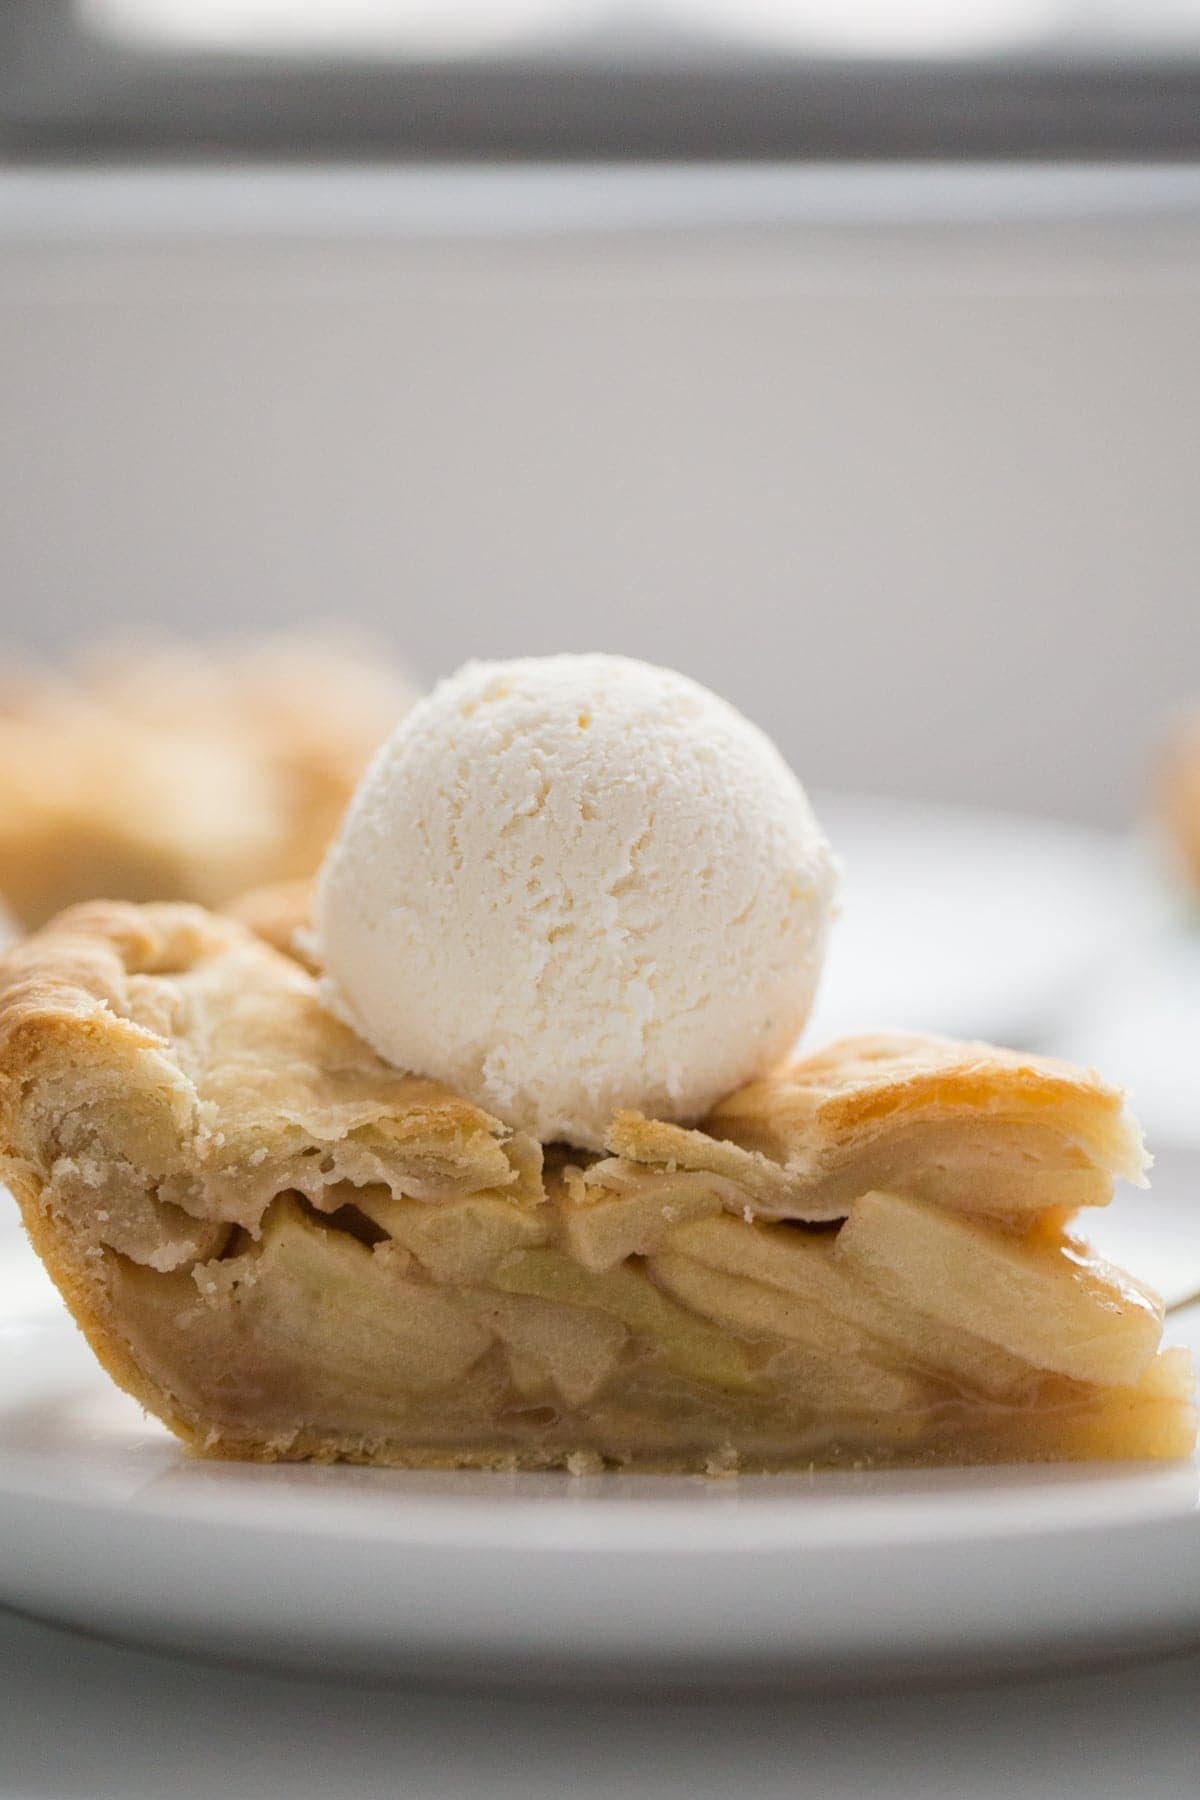 A slice of apple pie topped with vanilla ice cream